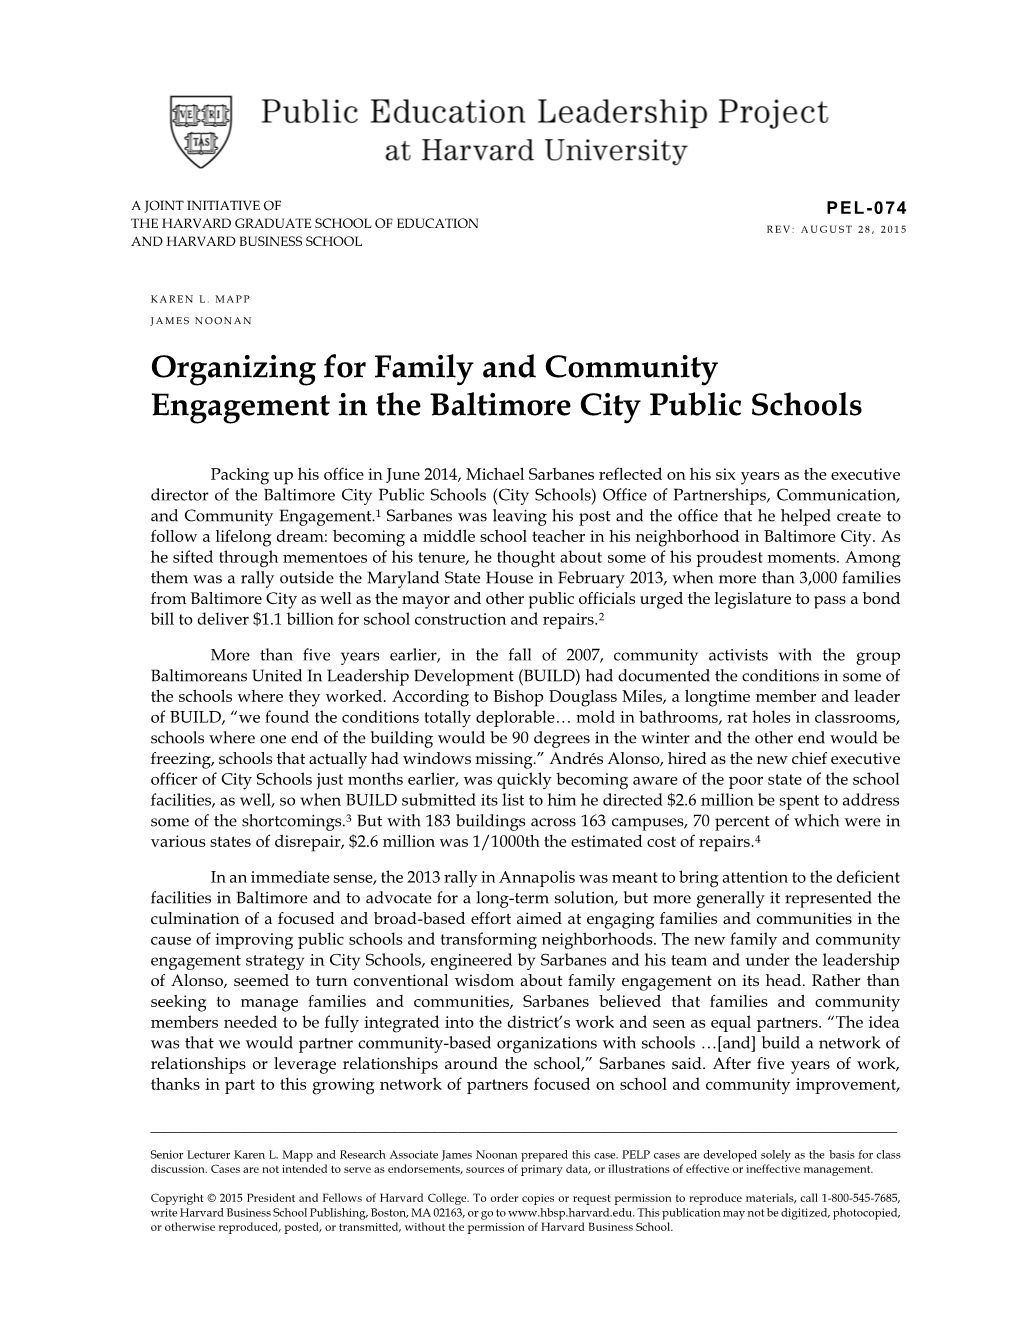 Organizing for Family and Community Engagement in Baltimore City Public Schools 074